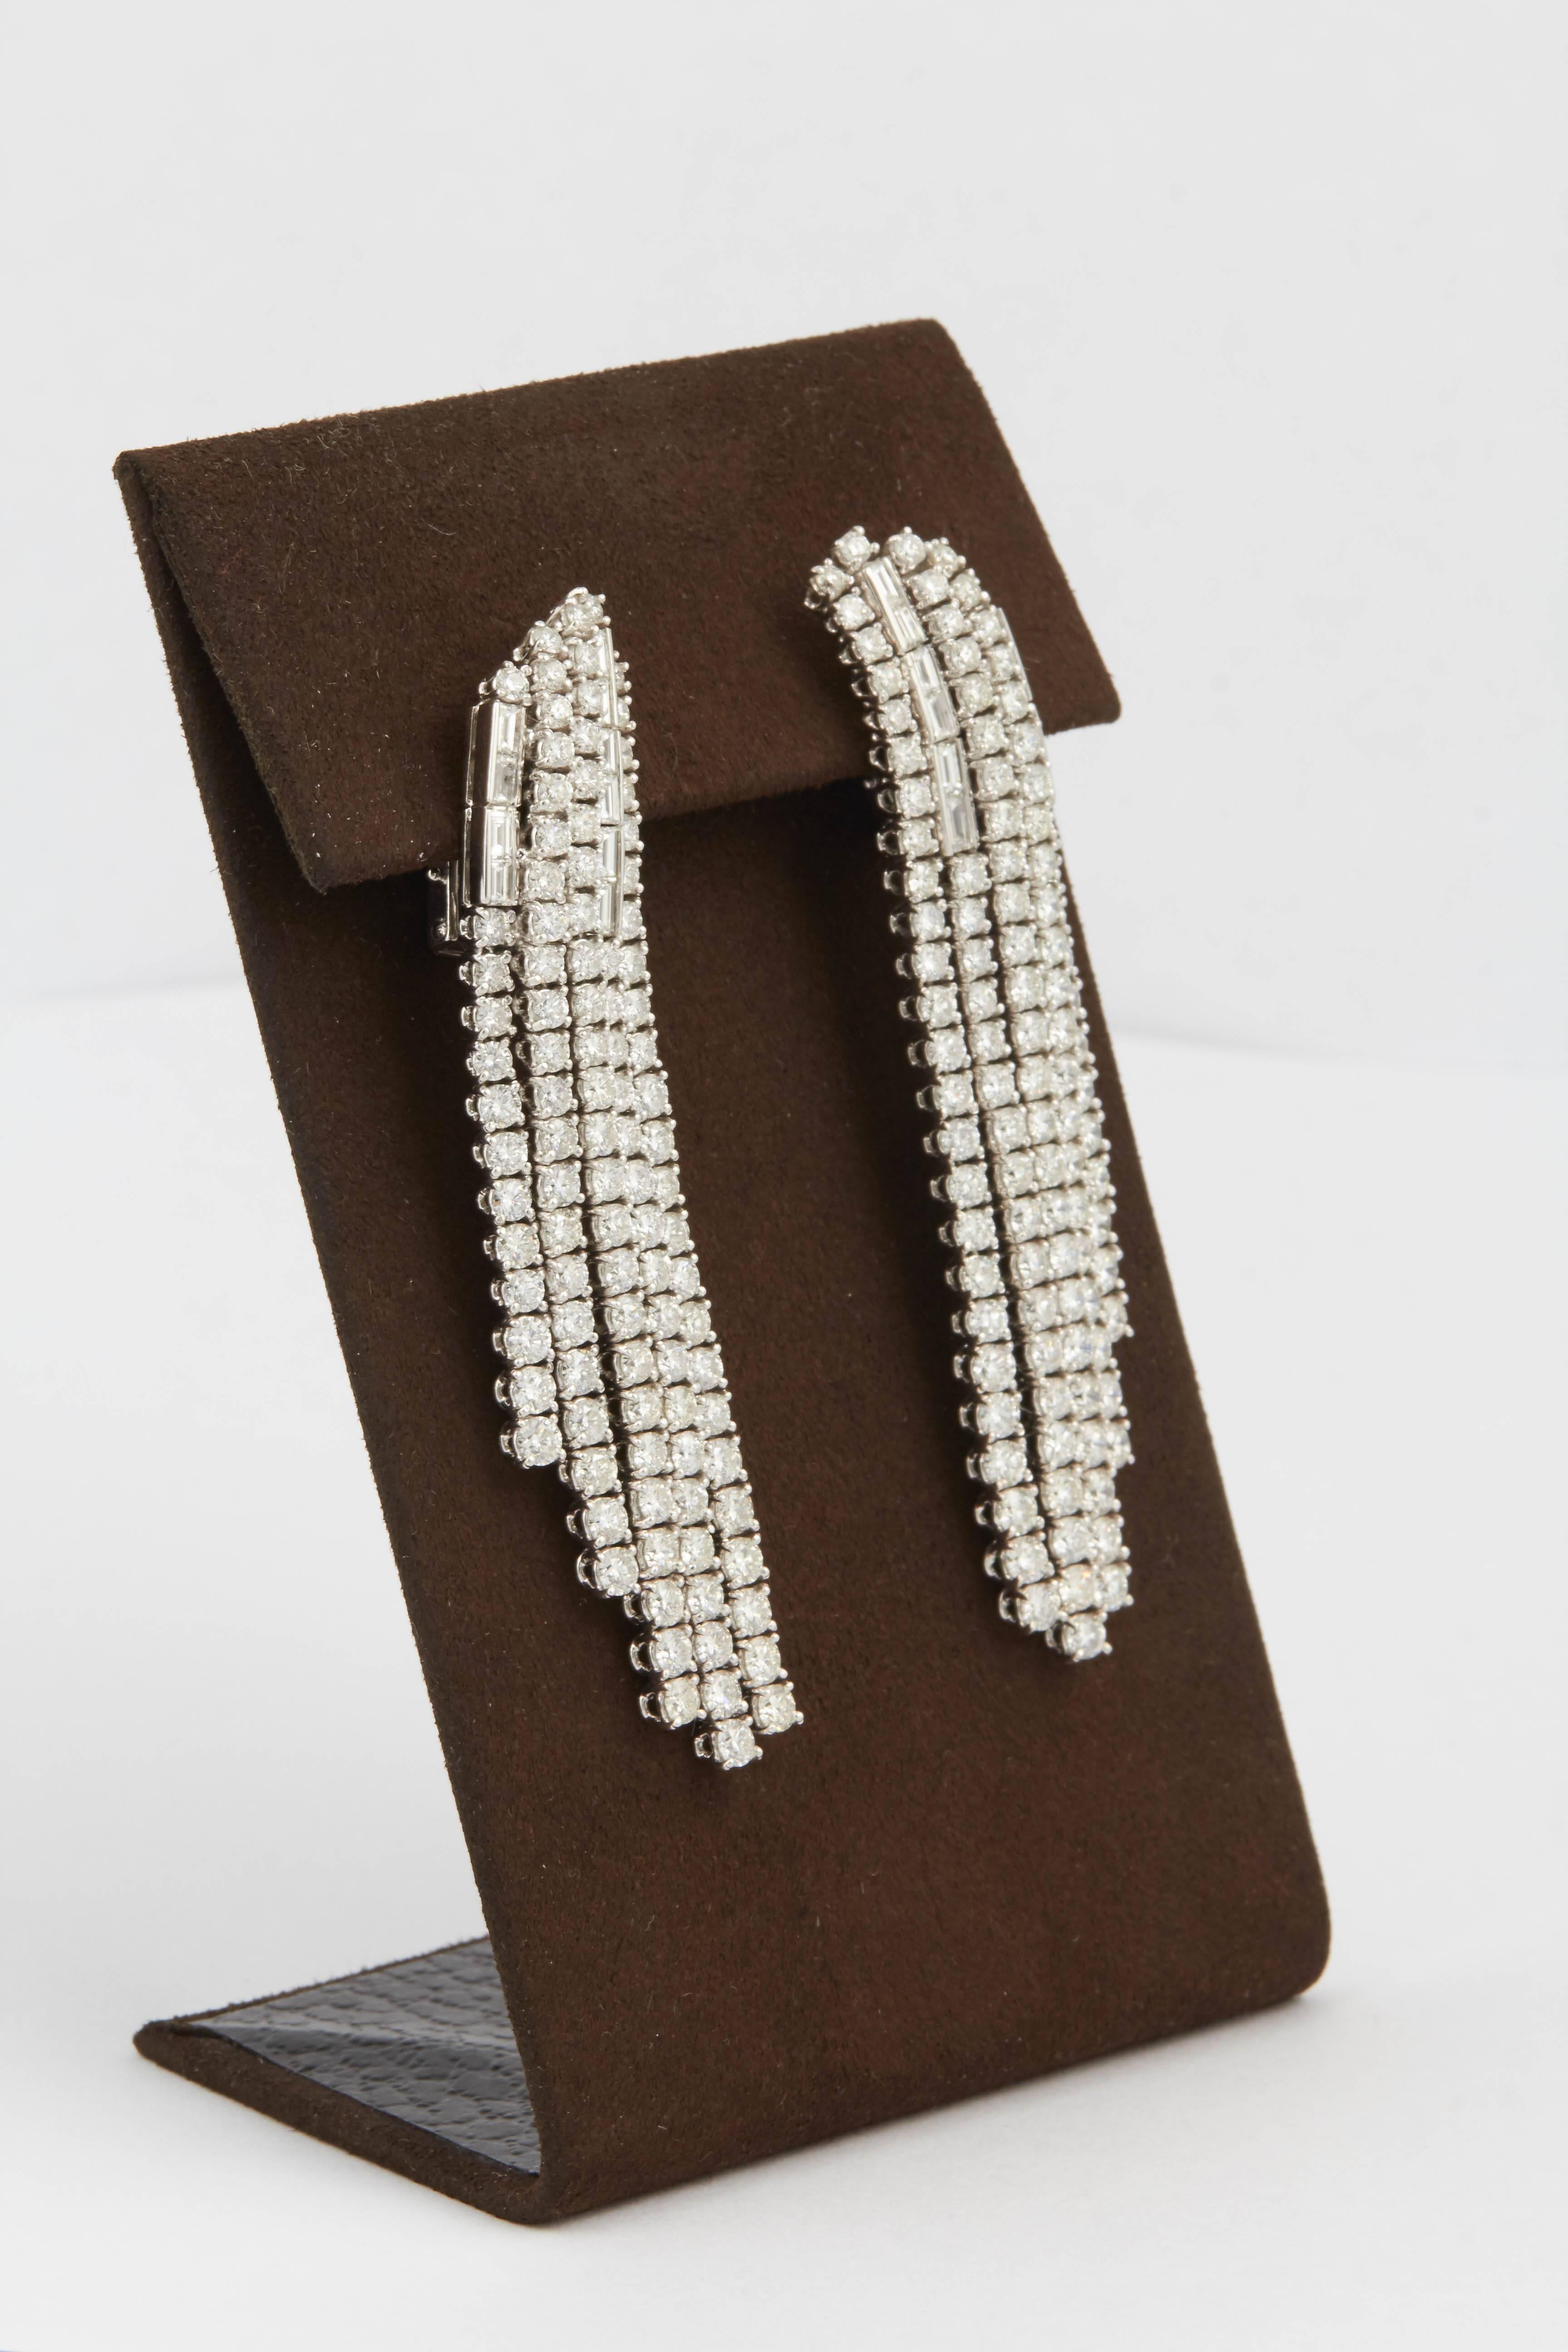 

Like a waterfall of diamonds!!

18.41 carats of round brilliant cut diamonds with subtle baguette diamond accents set in 18k white gold.

F/G VS diamonds

A FABULOUS earrings with great movement and presence.

Just over 3 inches long from its